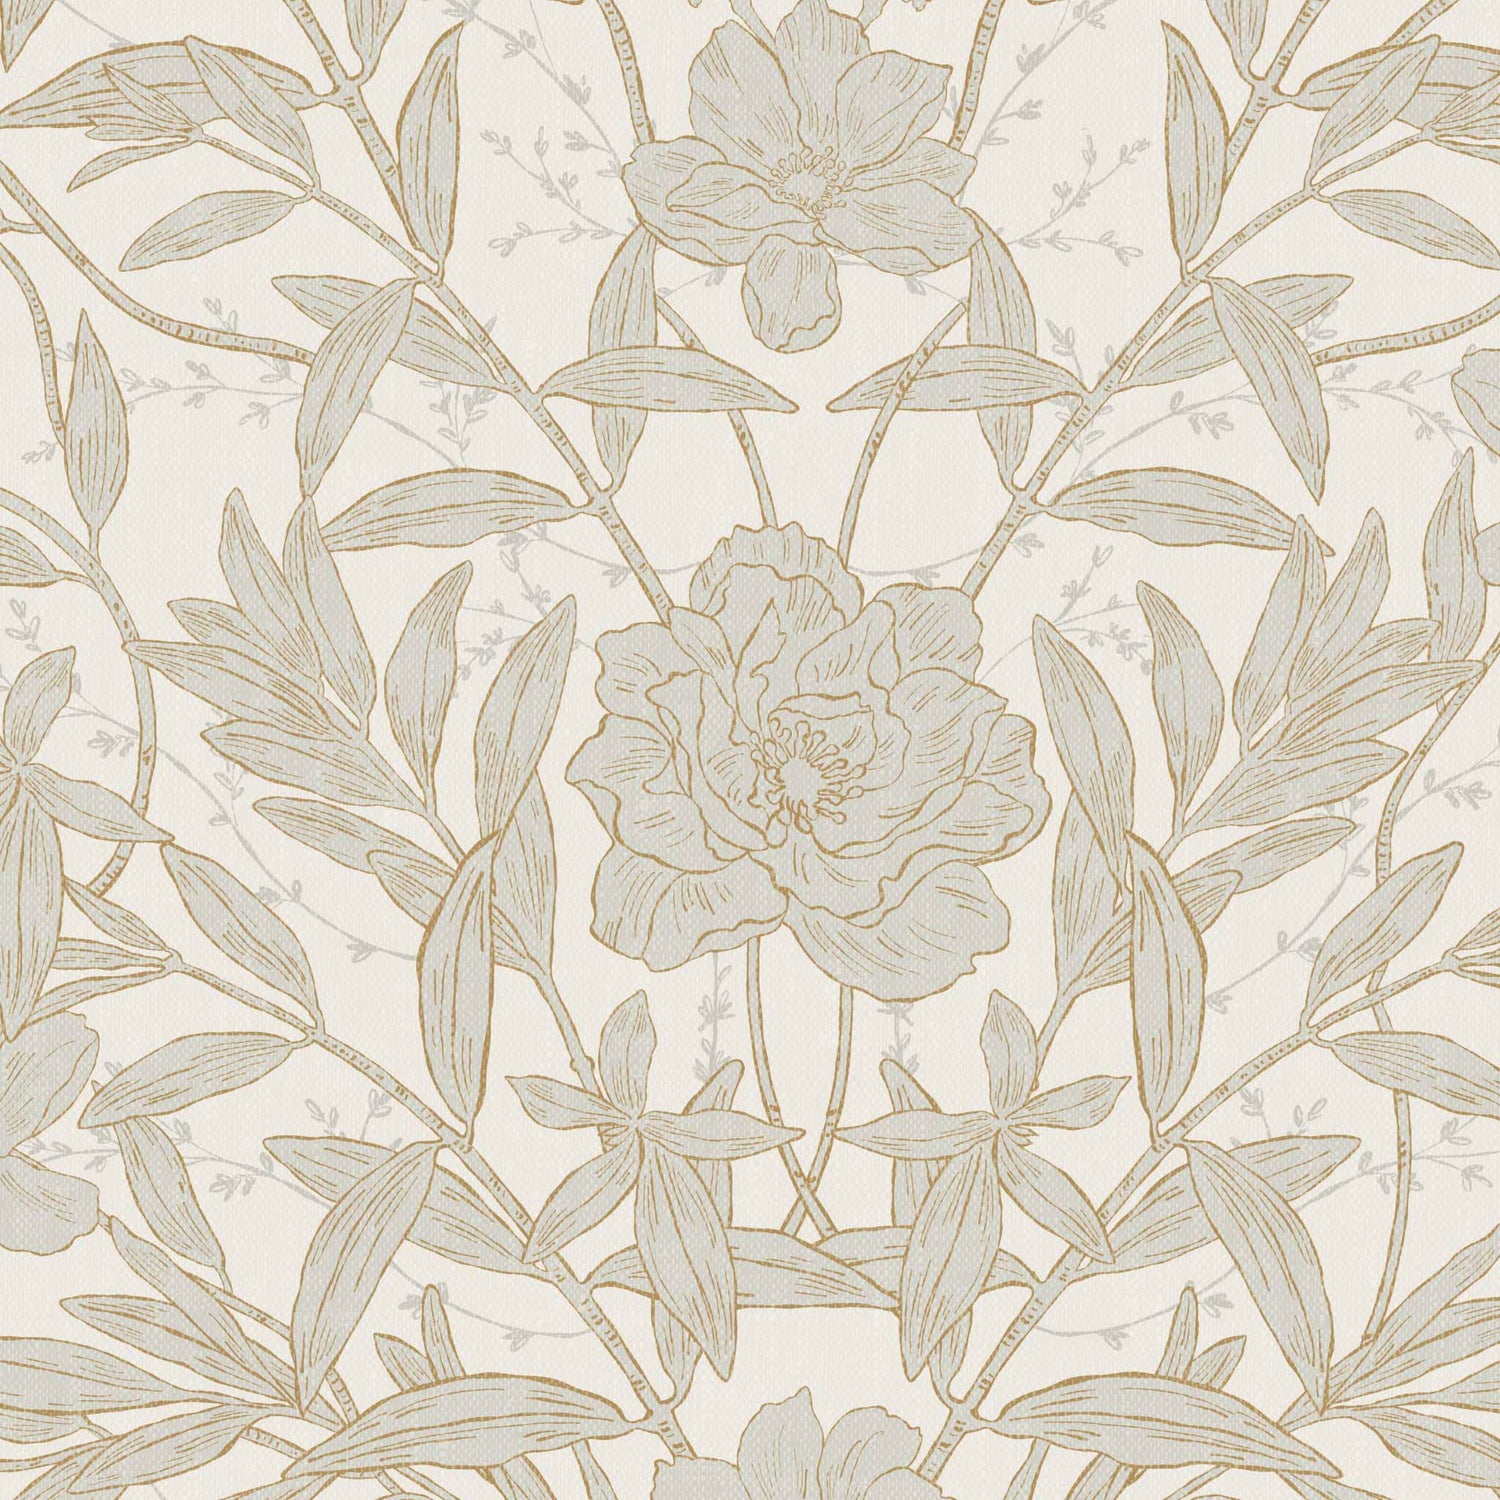 Our luxurious Peony Garden Wallpaper in Cream adds a majestic touch of sophistication to any space. Its distinctive classic peonies are guaranteed to add a sense of elegance to any wall. 